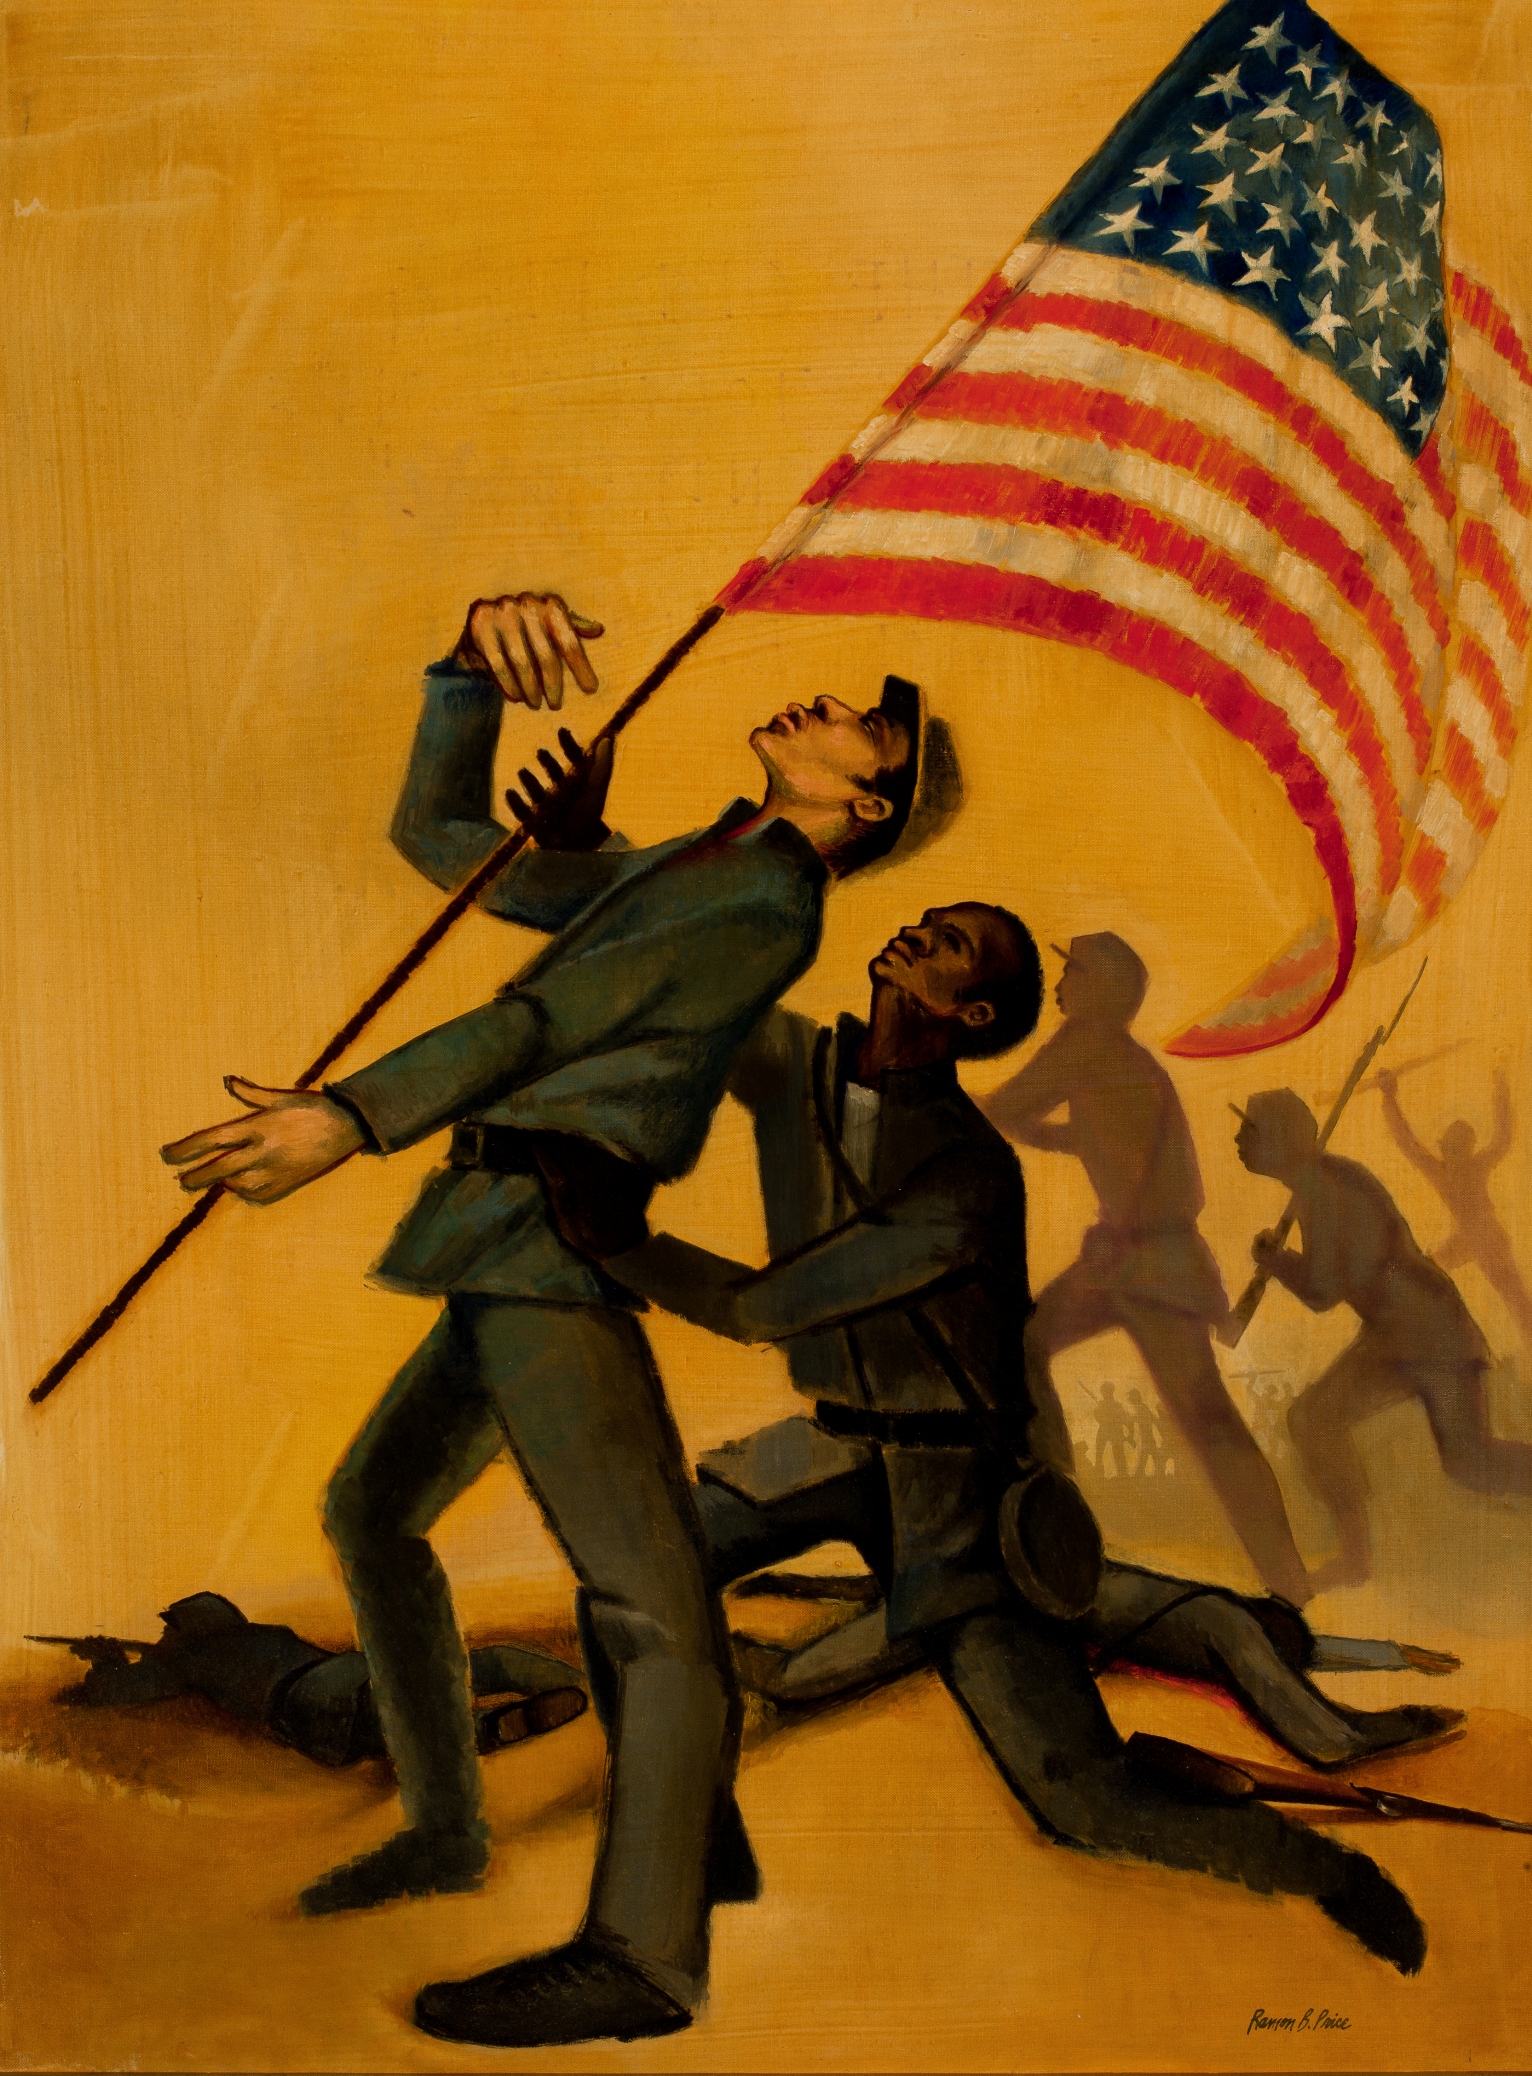 Ramon B. Price, And the Old Flag Never Touched the Ground, 1963, watercolor, 39.56 x 29.37 inches (DuSable Museum of African American History)